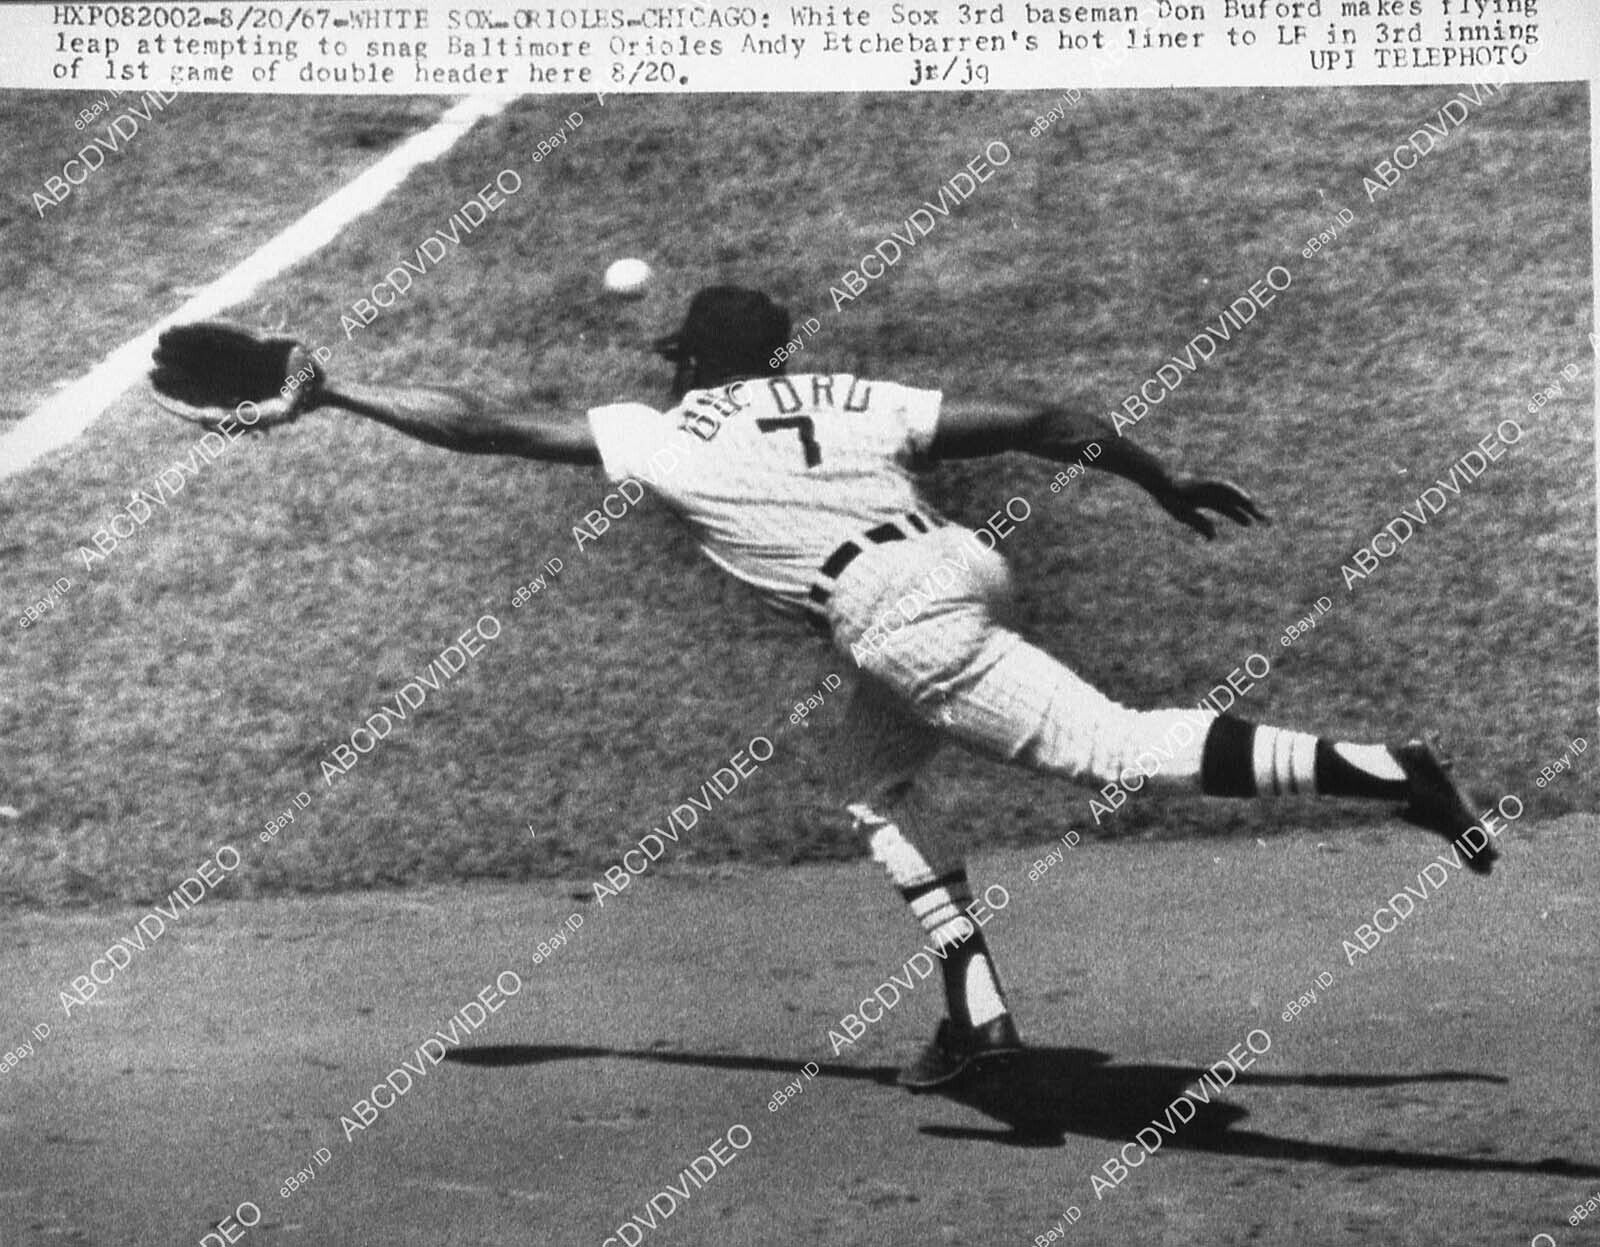 10997-025 MLBaseball Chicago White Sox Don Buford tries leaping catch 10997-025